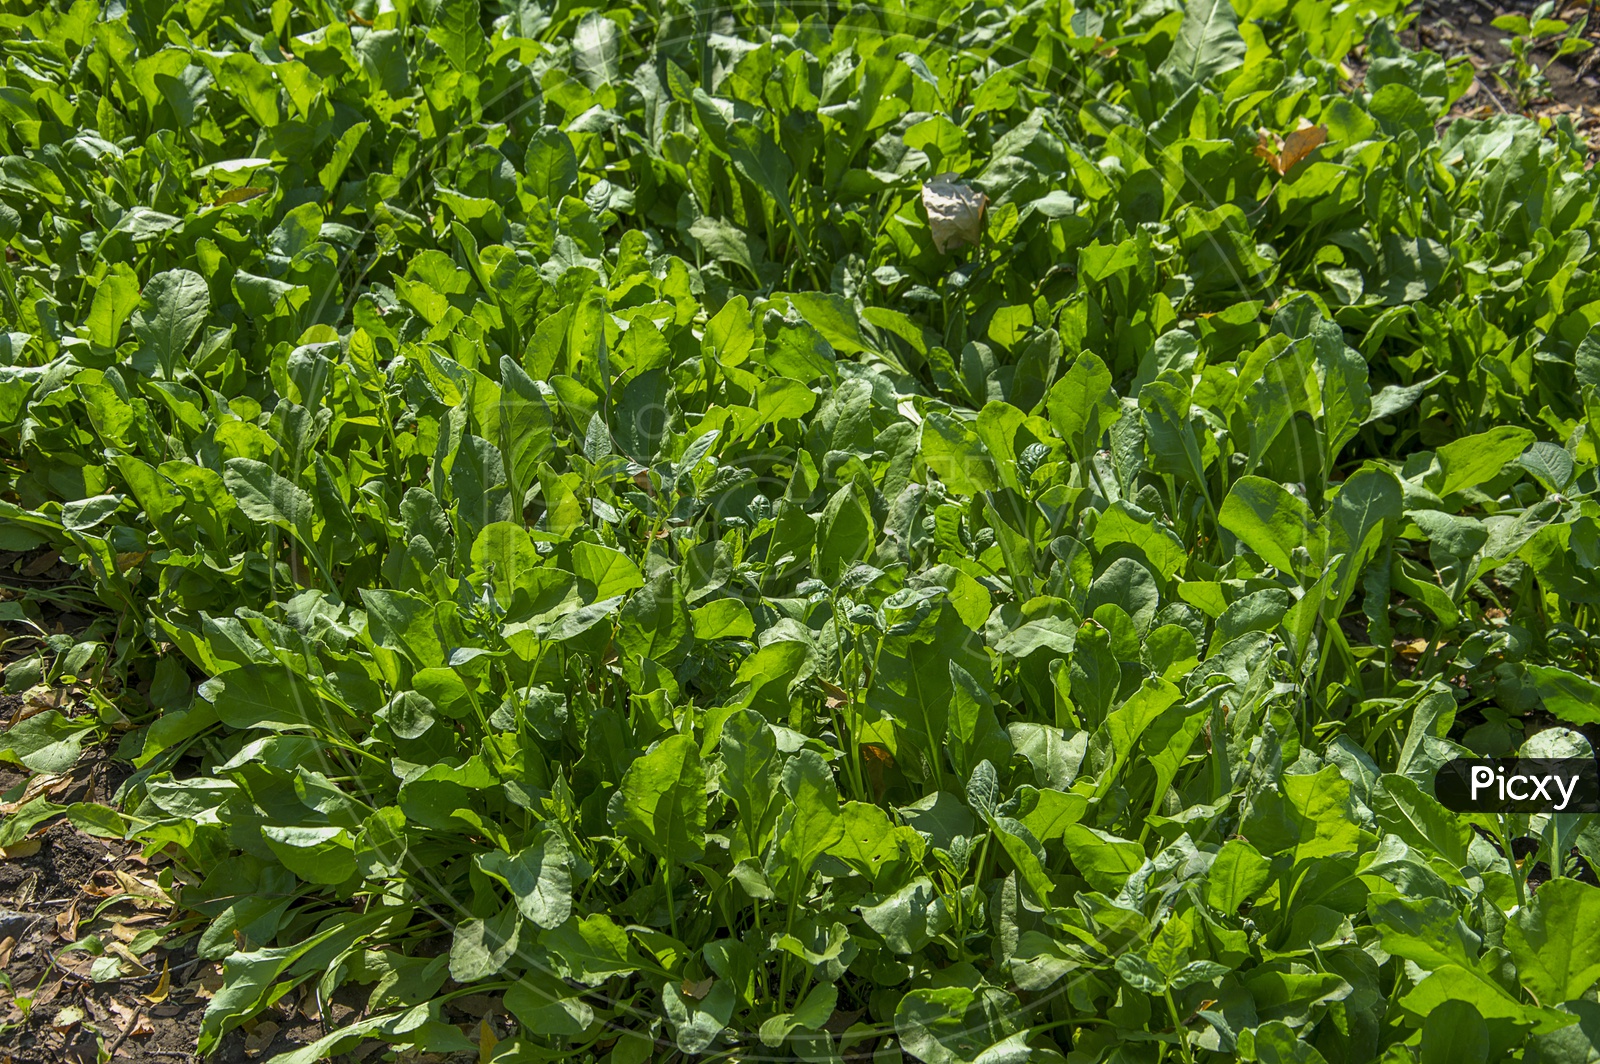 Fresh Green Spinach Leaves Growing In an Agricultural Farm